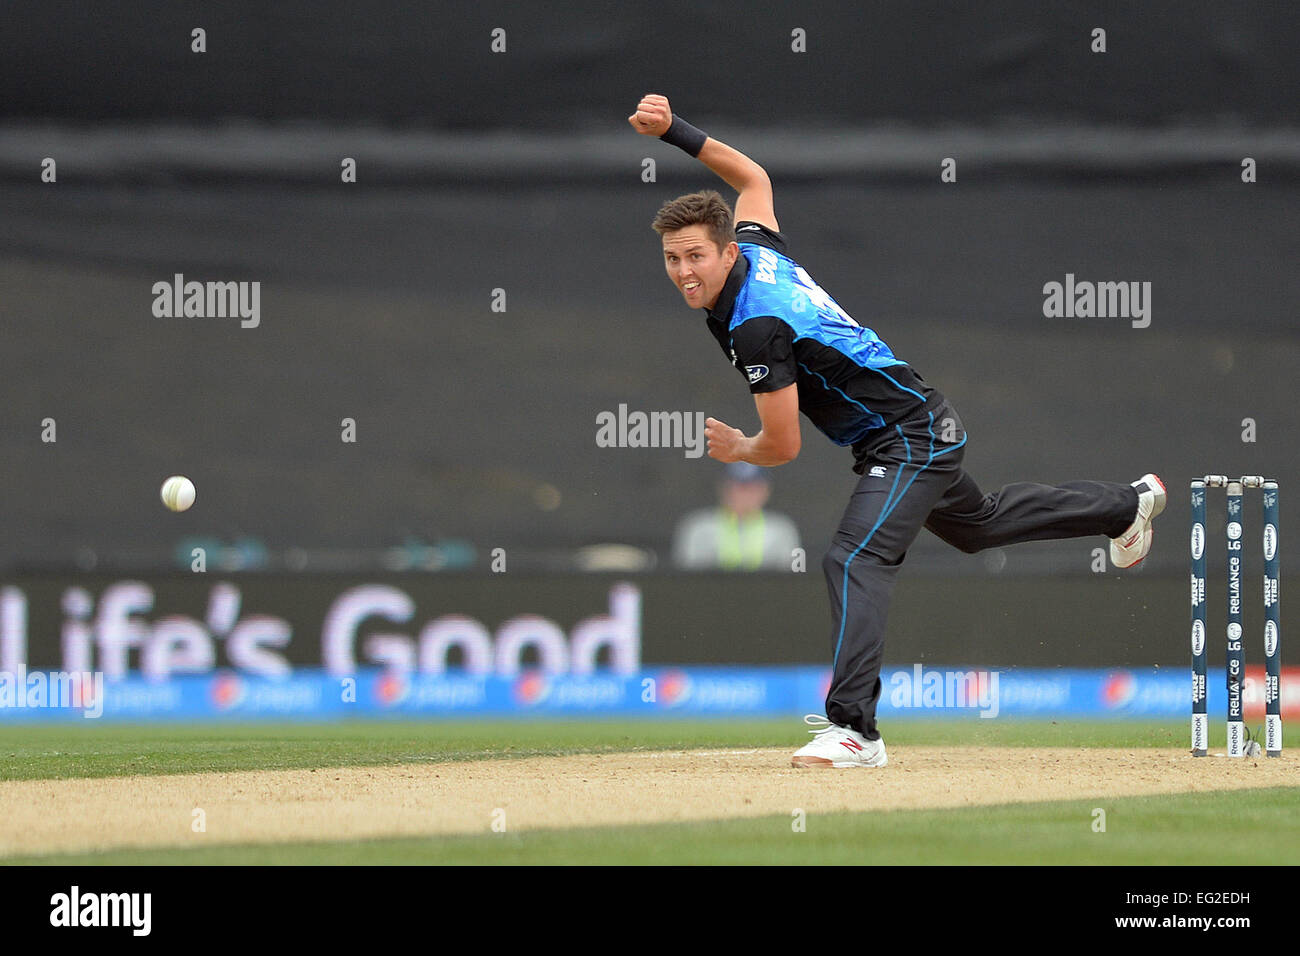 Christchurch, New Zealand. 14th Feb, 2015. Christchurch, New Zealand - February 14, 2015 - Trent Boult of New Zealand bowling during the ICC Cricket World Cup Match between Sri Lanka and New Zealand at Hagley Oval on February 14, 2015 in Christchurch, New Zealand. © dpa/Alamy Live News Stock Photo